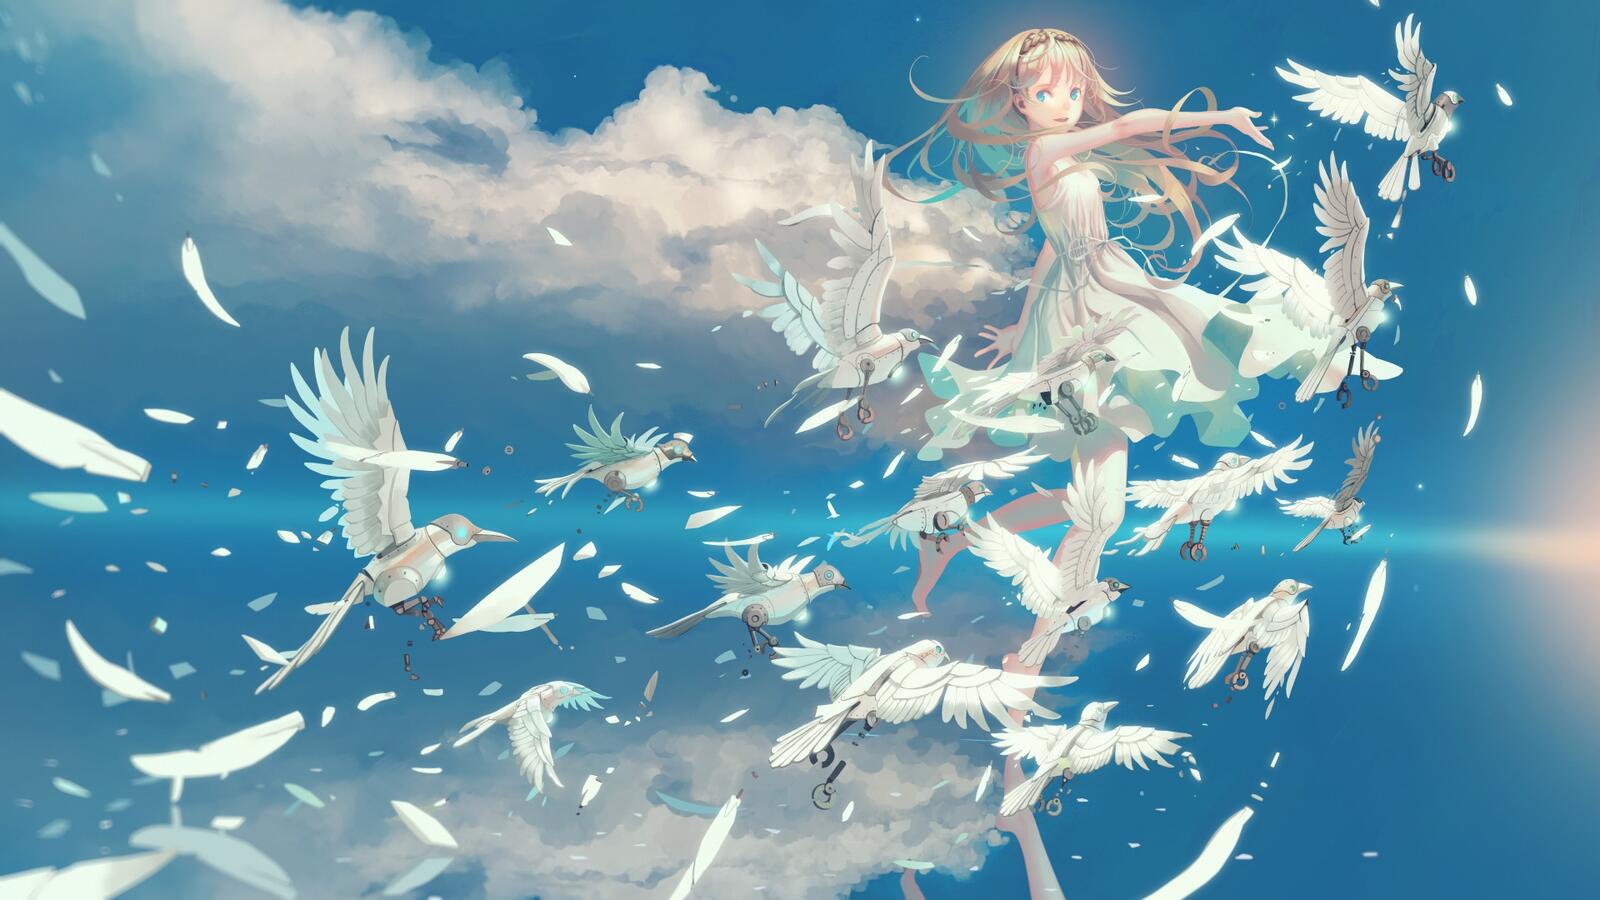 Wallpapers wallpaper anime girl behind the clouds feathers on the desktop